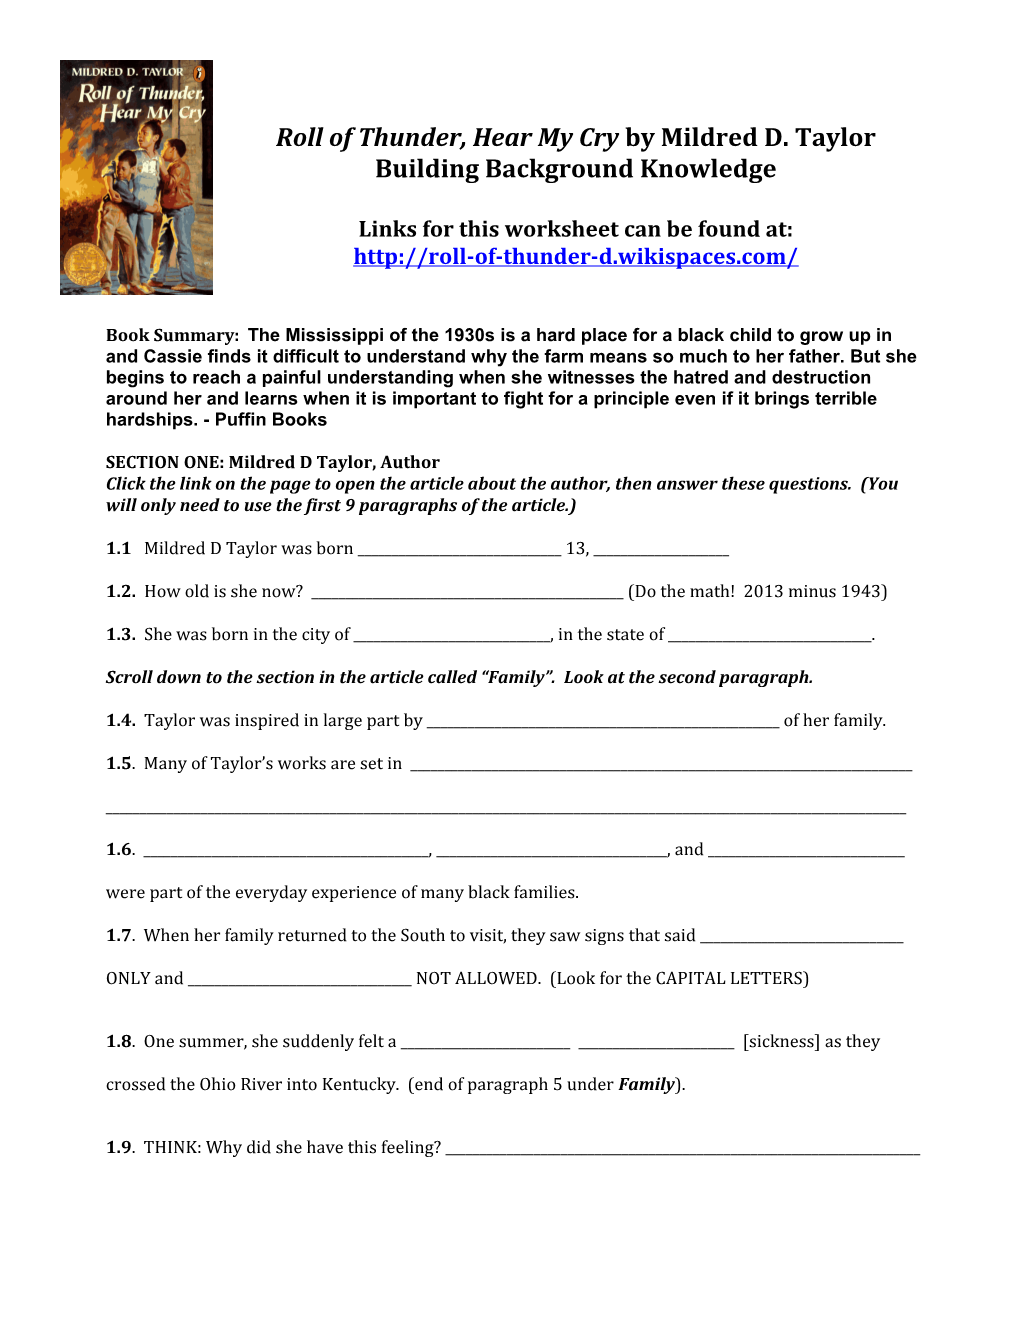 Links for This Worksheet Can Be Found At